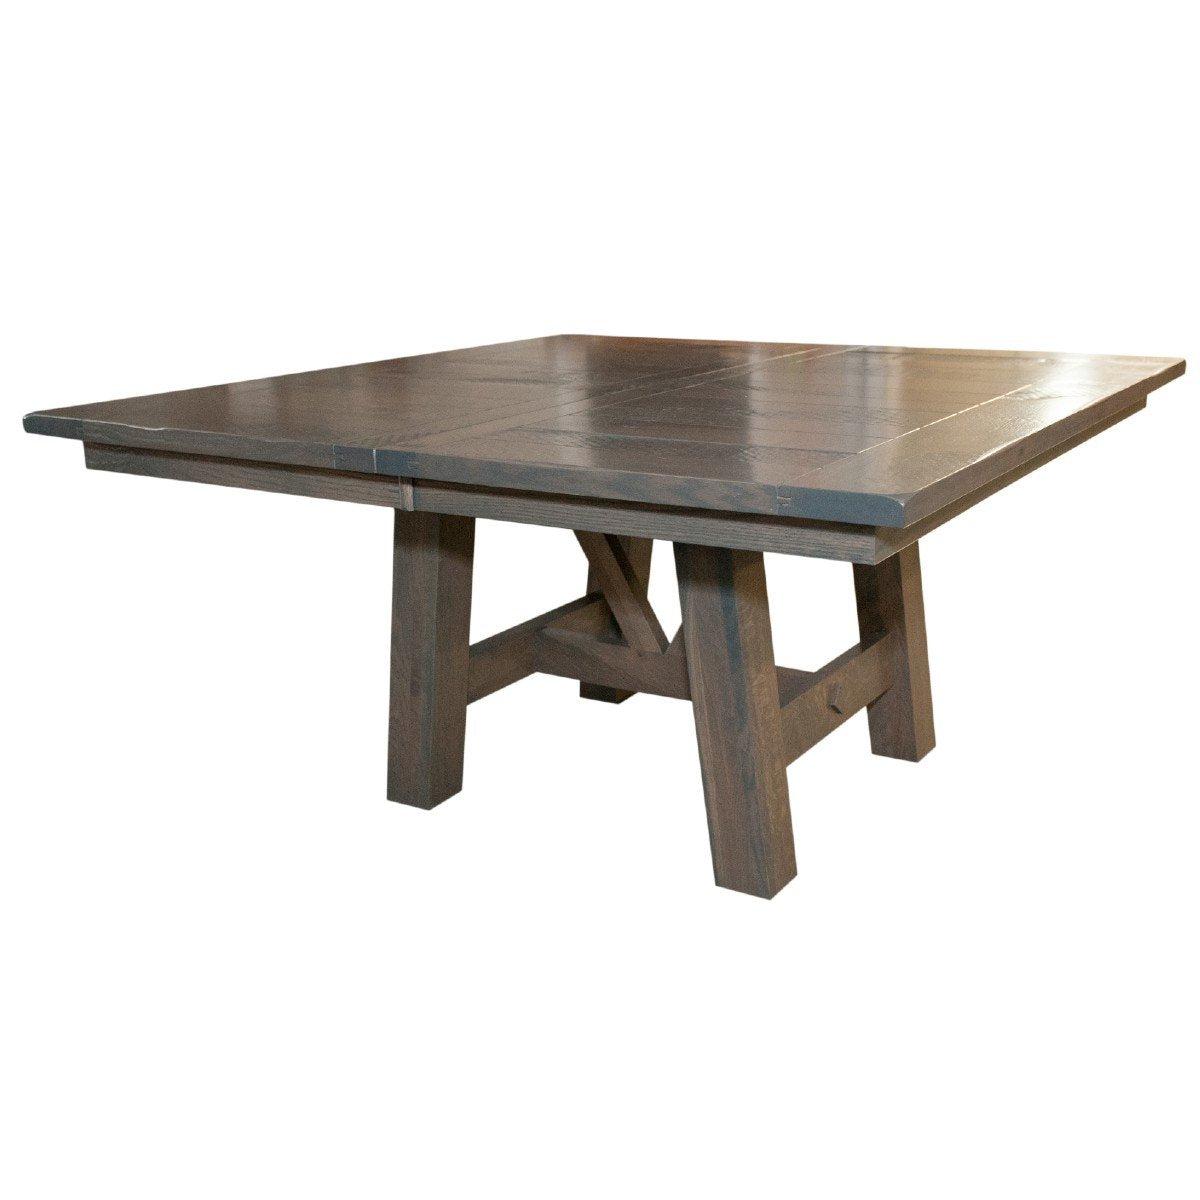 Rustic Solid Wood Square Table